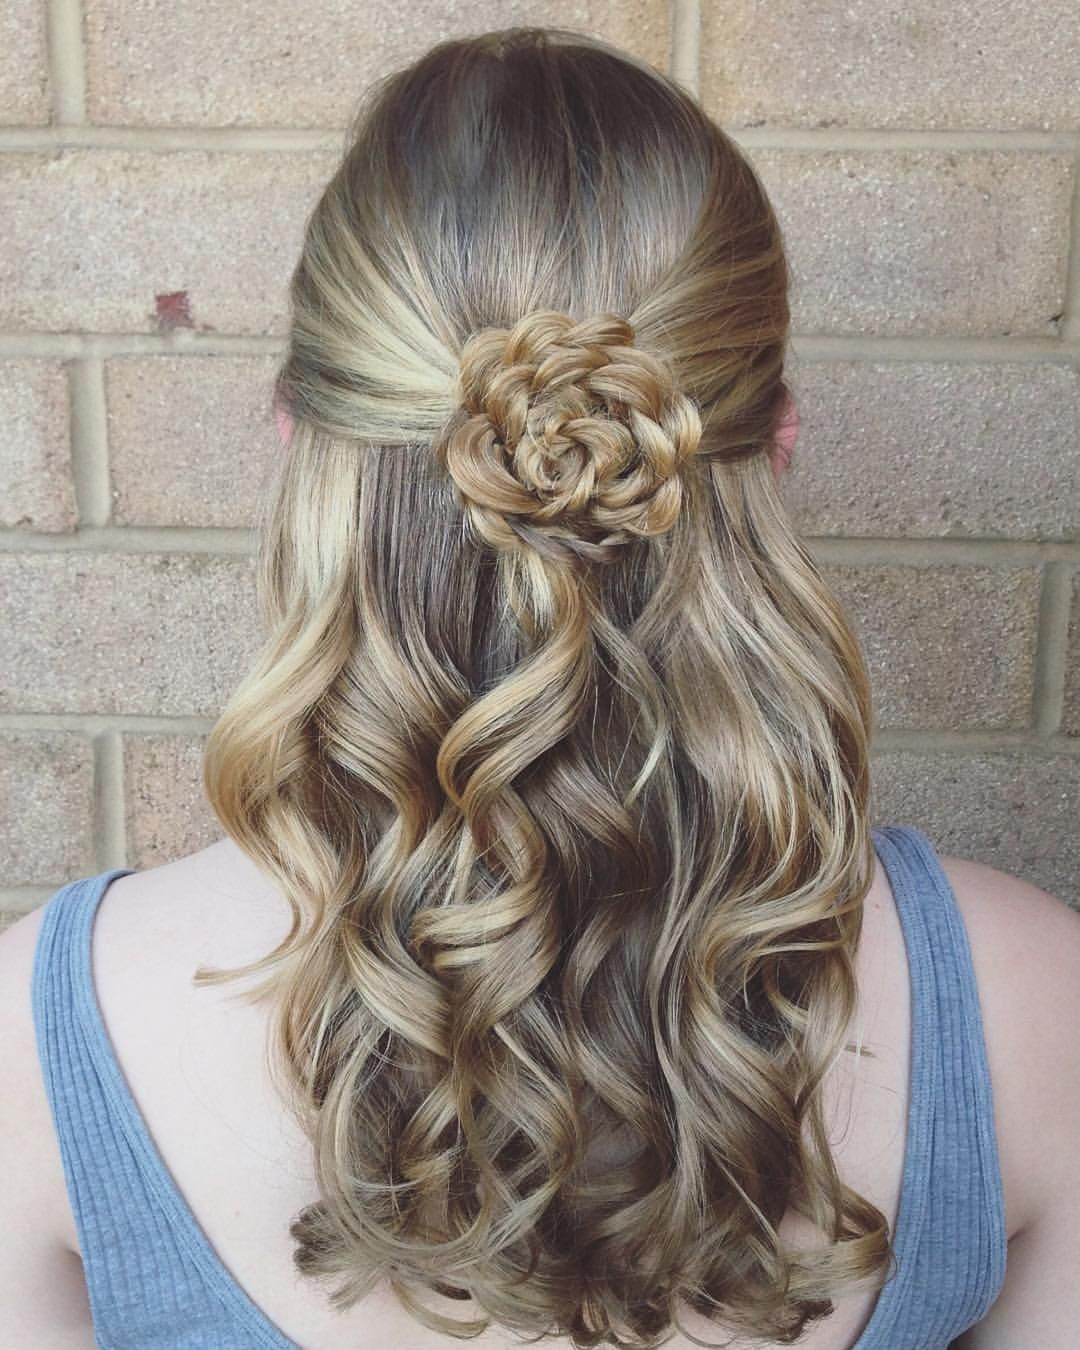 Prom Hairstyle With Flowers
 Abigail Rose on Instagram “Those curls a flower braid